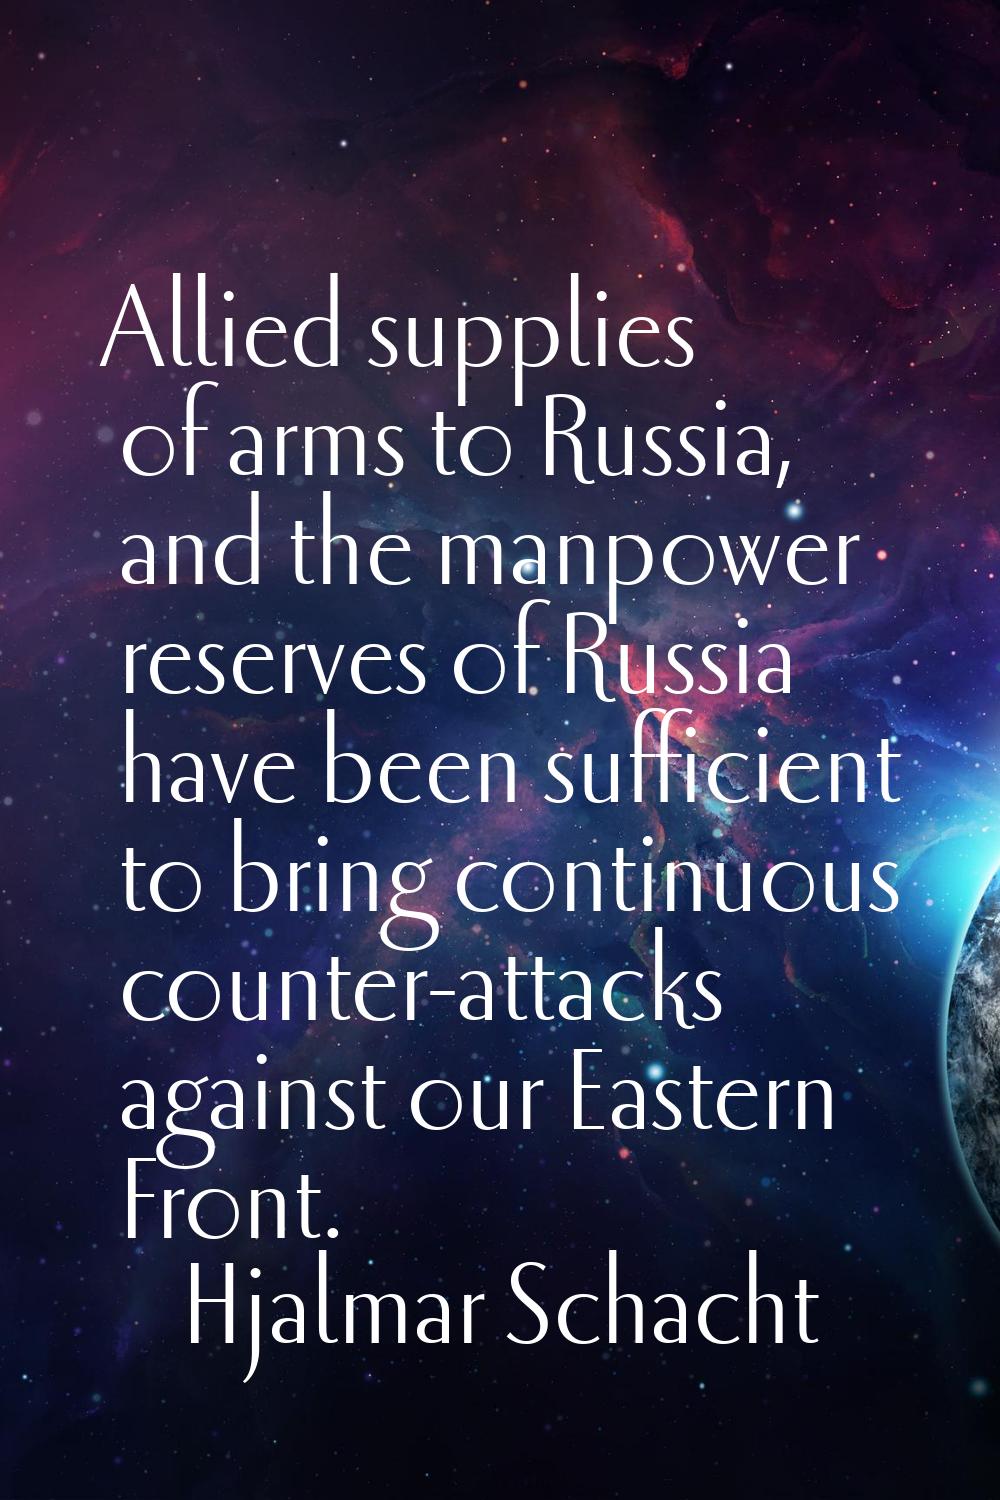 Allied supplies of arms to Russia, and the manpower reserves of Russia have been sufficient to brin